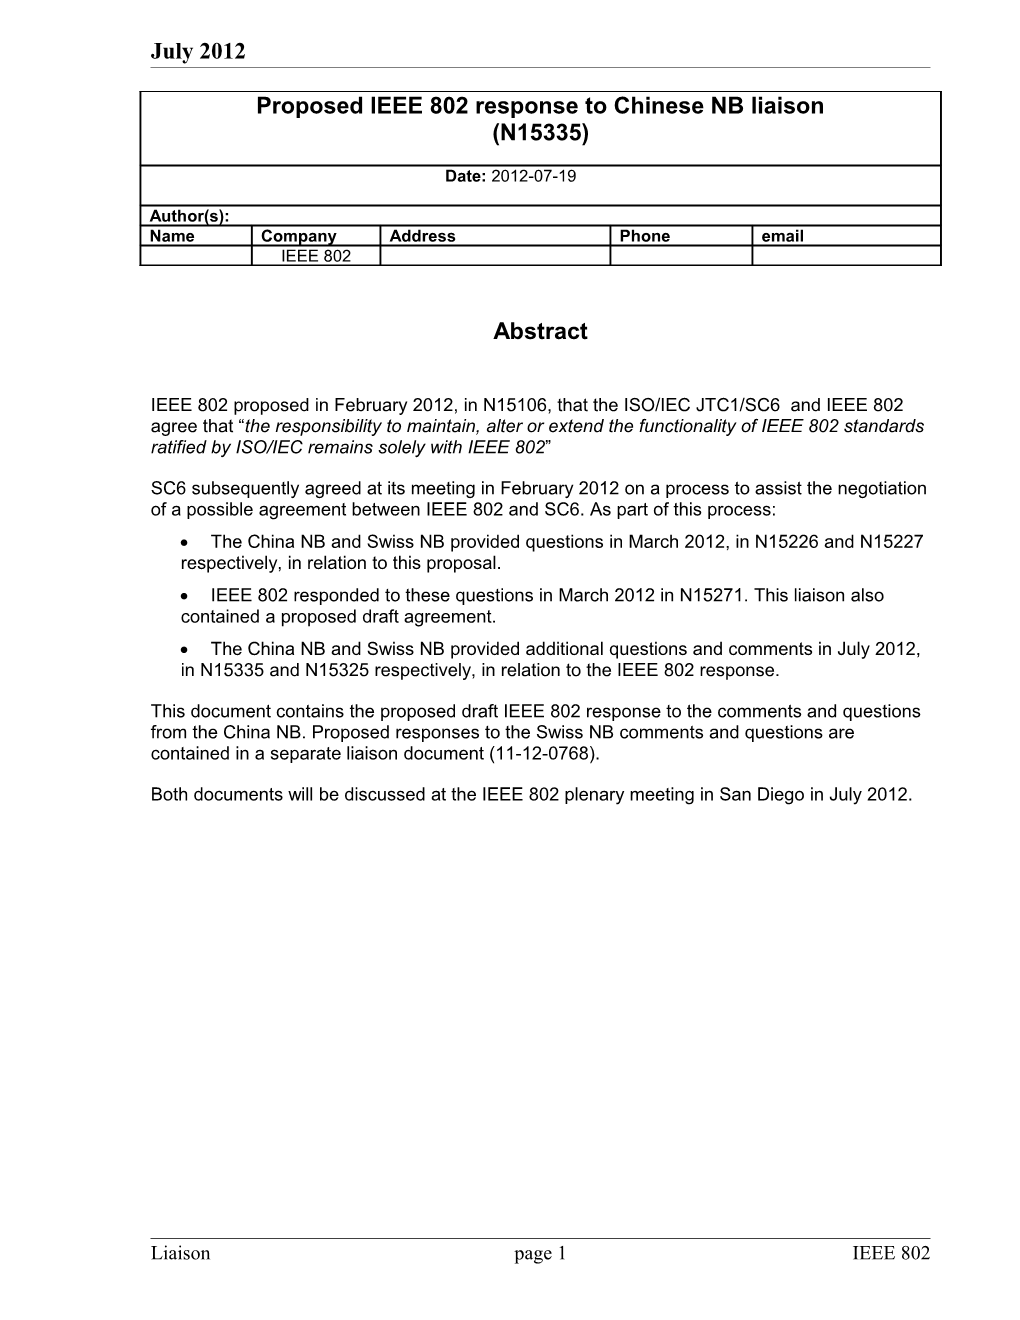 IEEE 802 Proposed in February 2012, in N15106, That the ISO/IEC JTC1/SC6 and IEEE 802 Agree